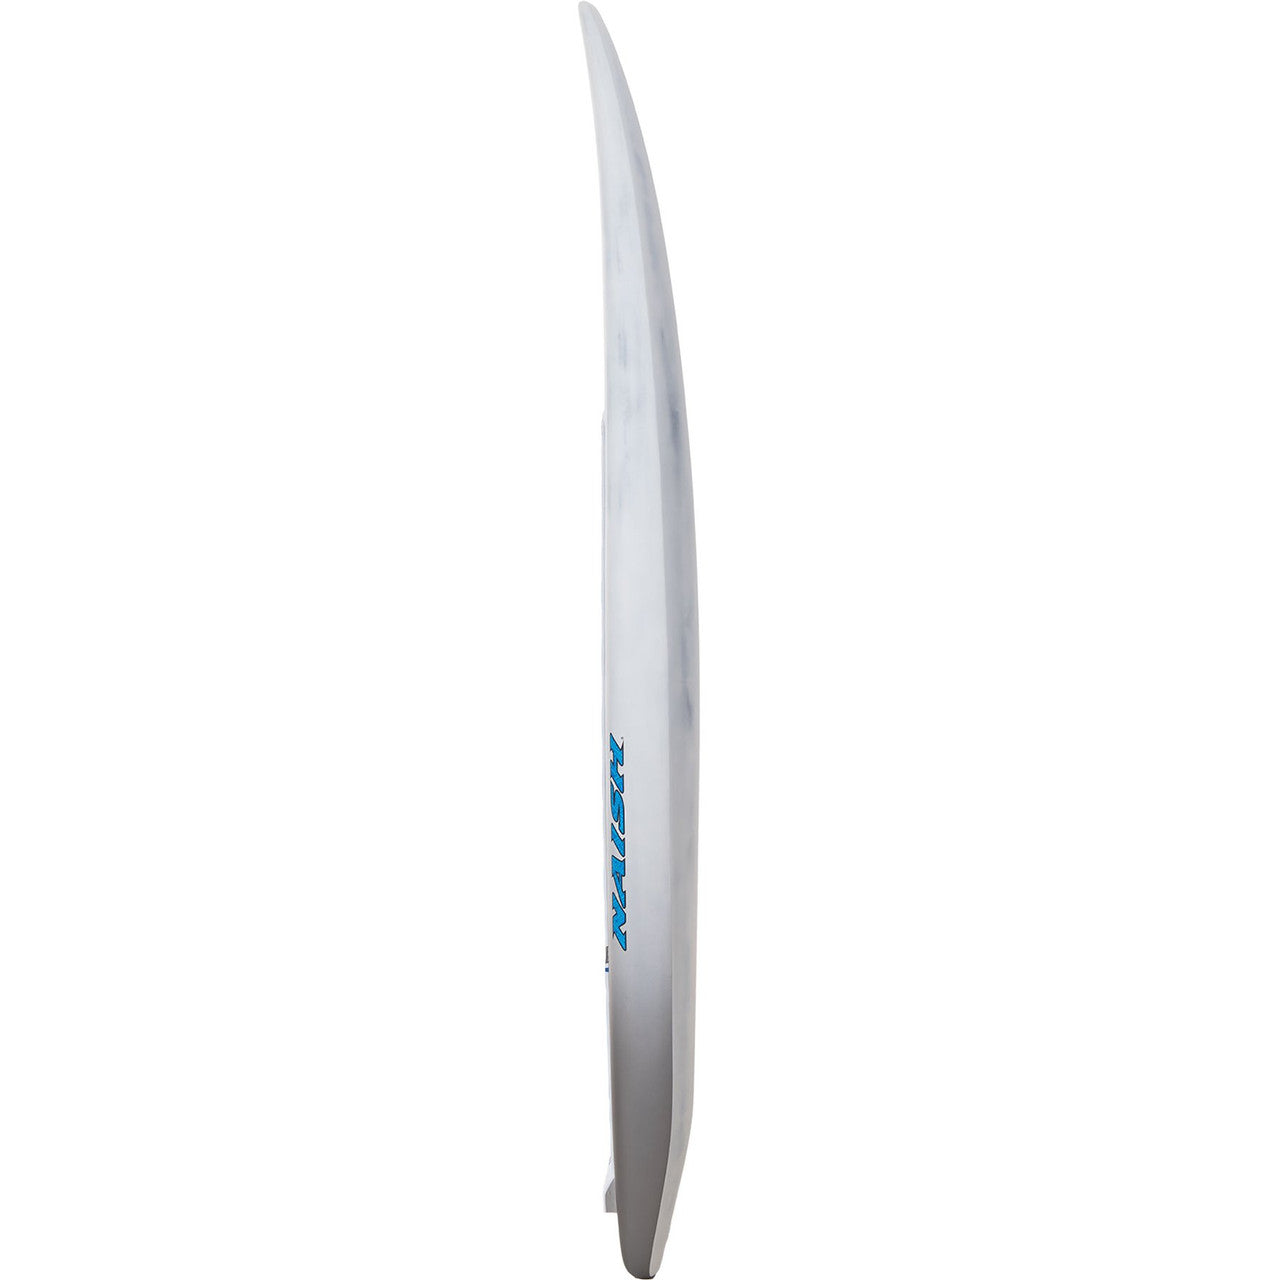 Naish Hover Wing Foil Carbon Ultra  Wing-Surfing/Foil SUP 140 Liter